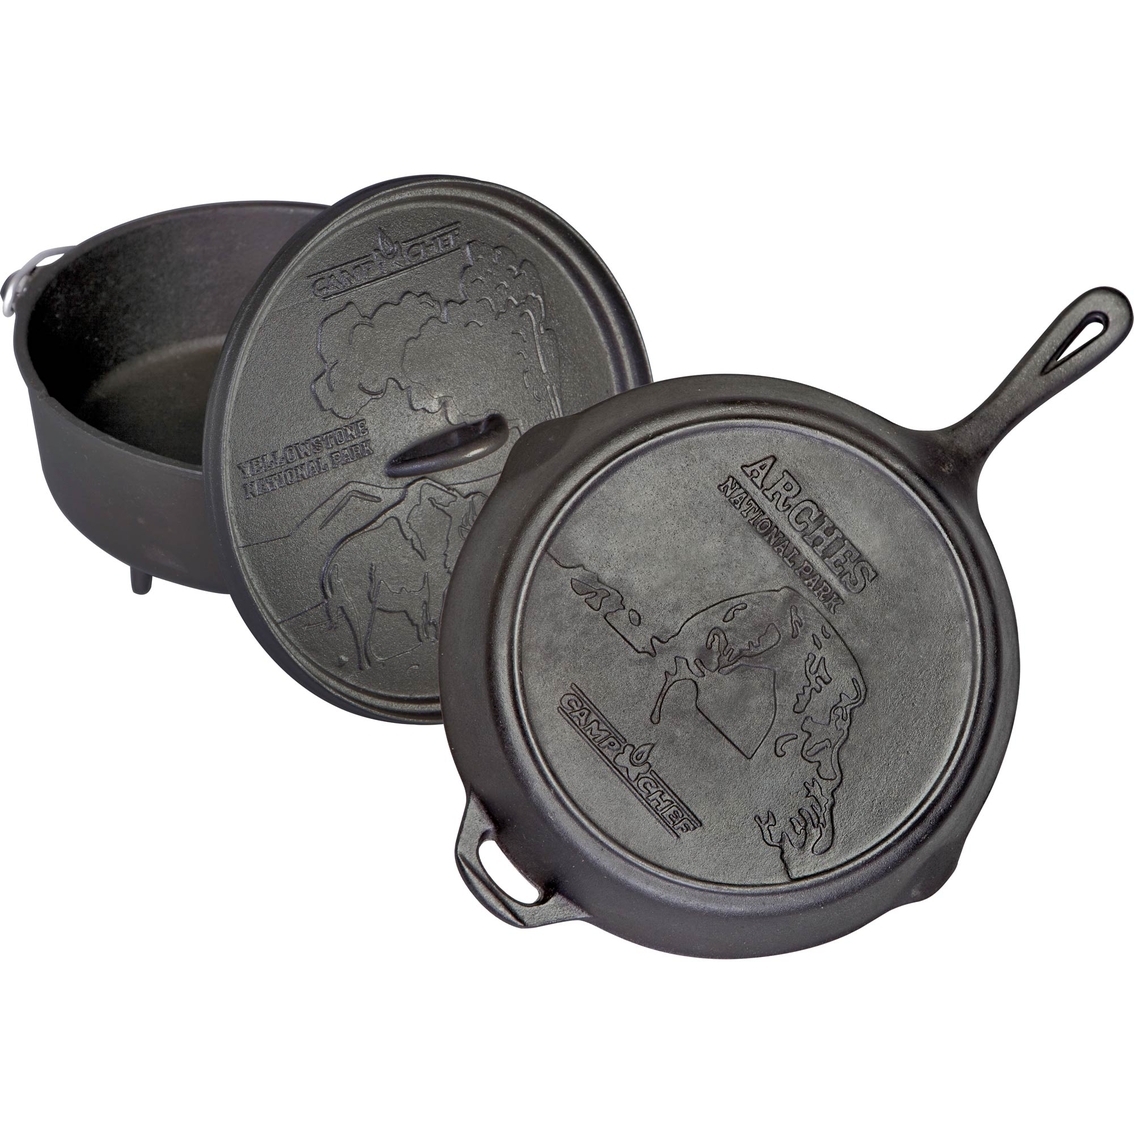 Camp Chef National Parks Cast Iron Set - Image 3 of 4